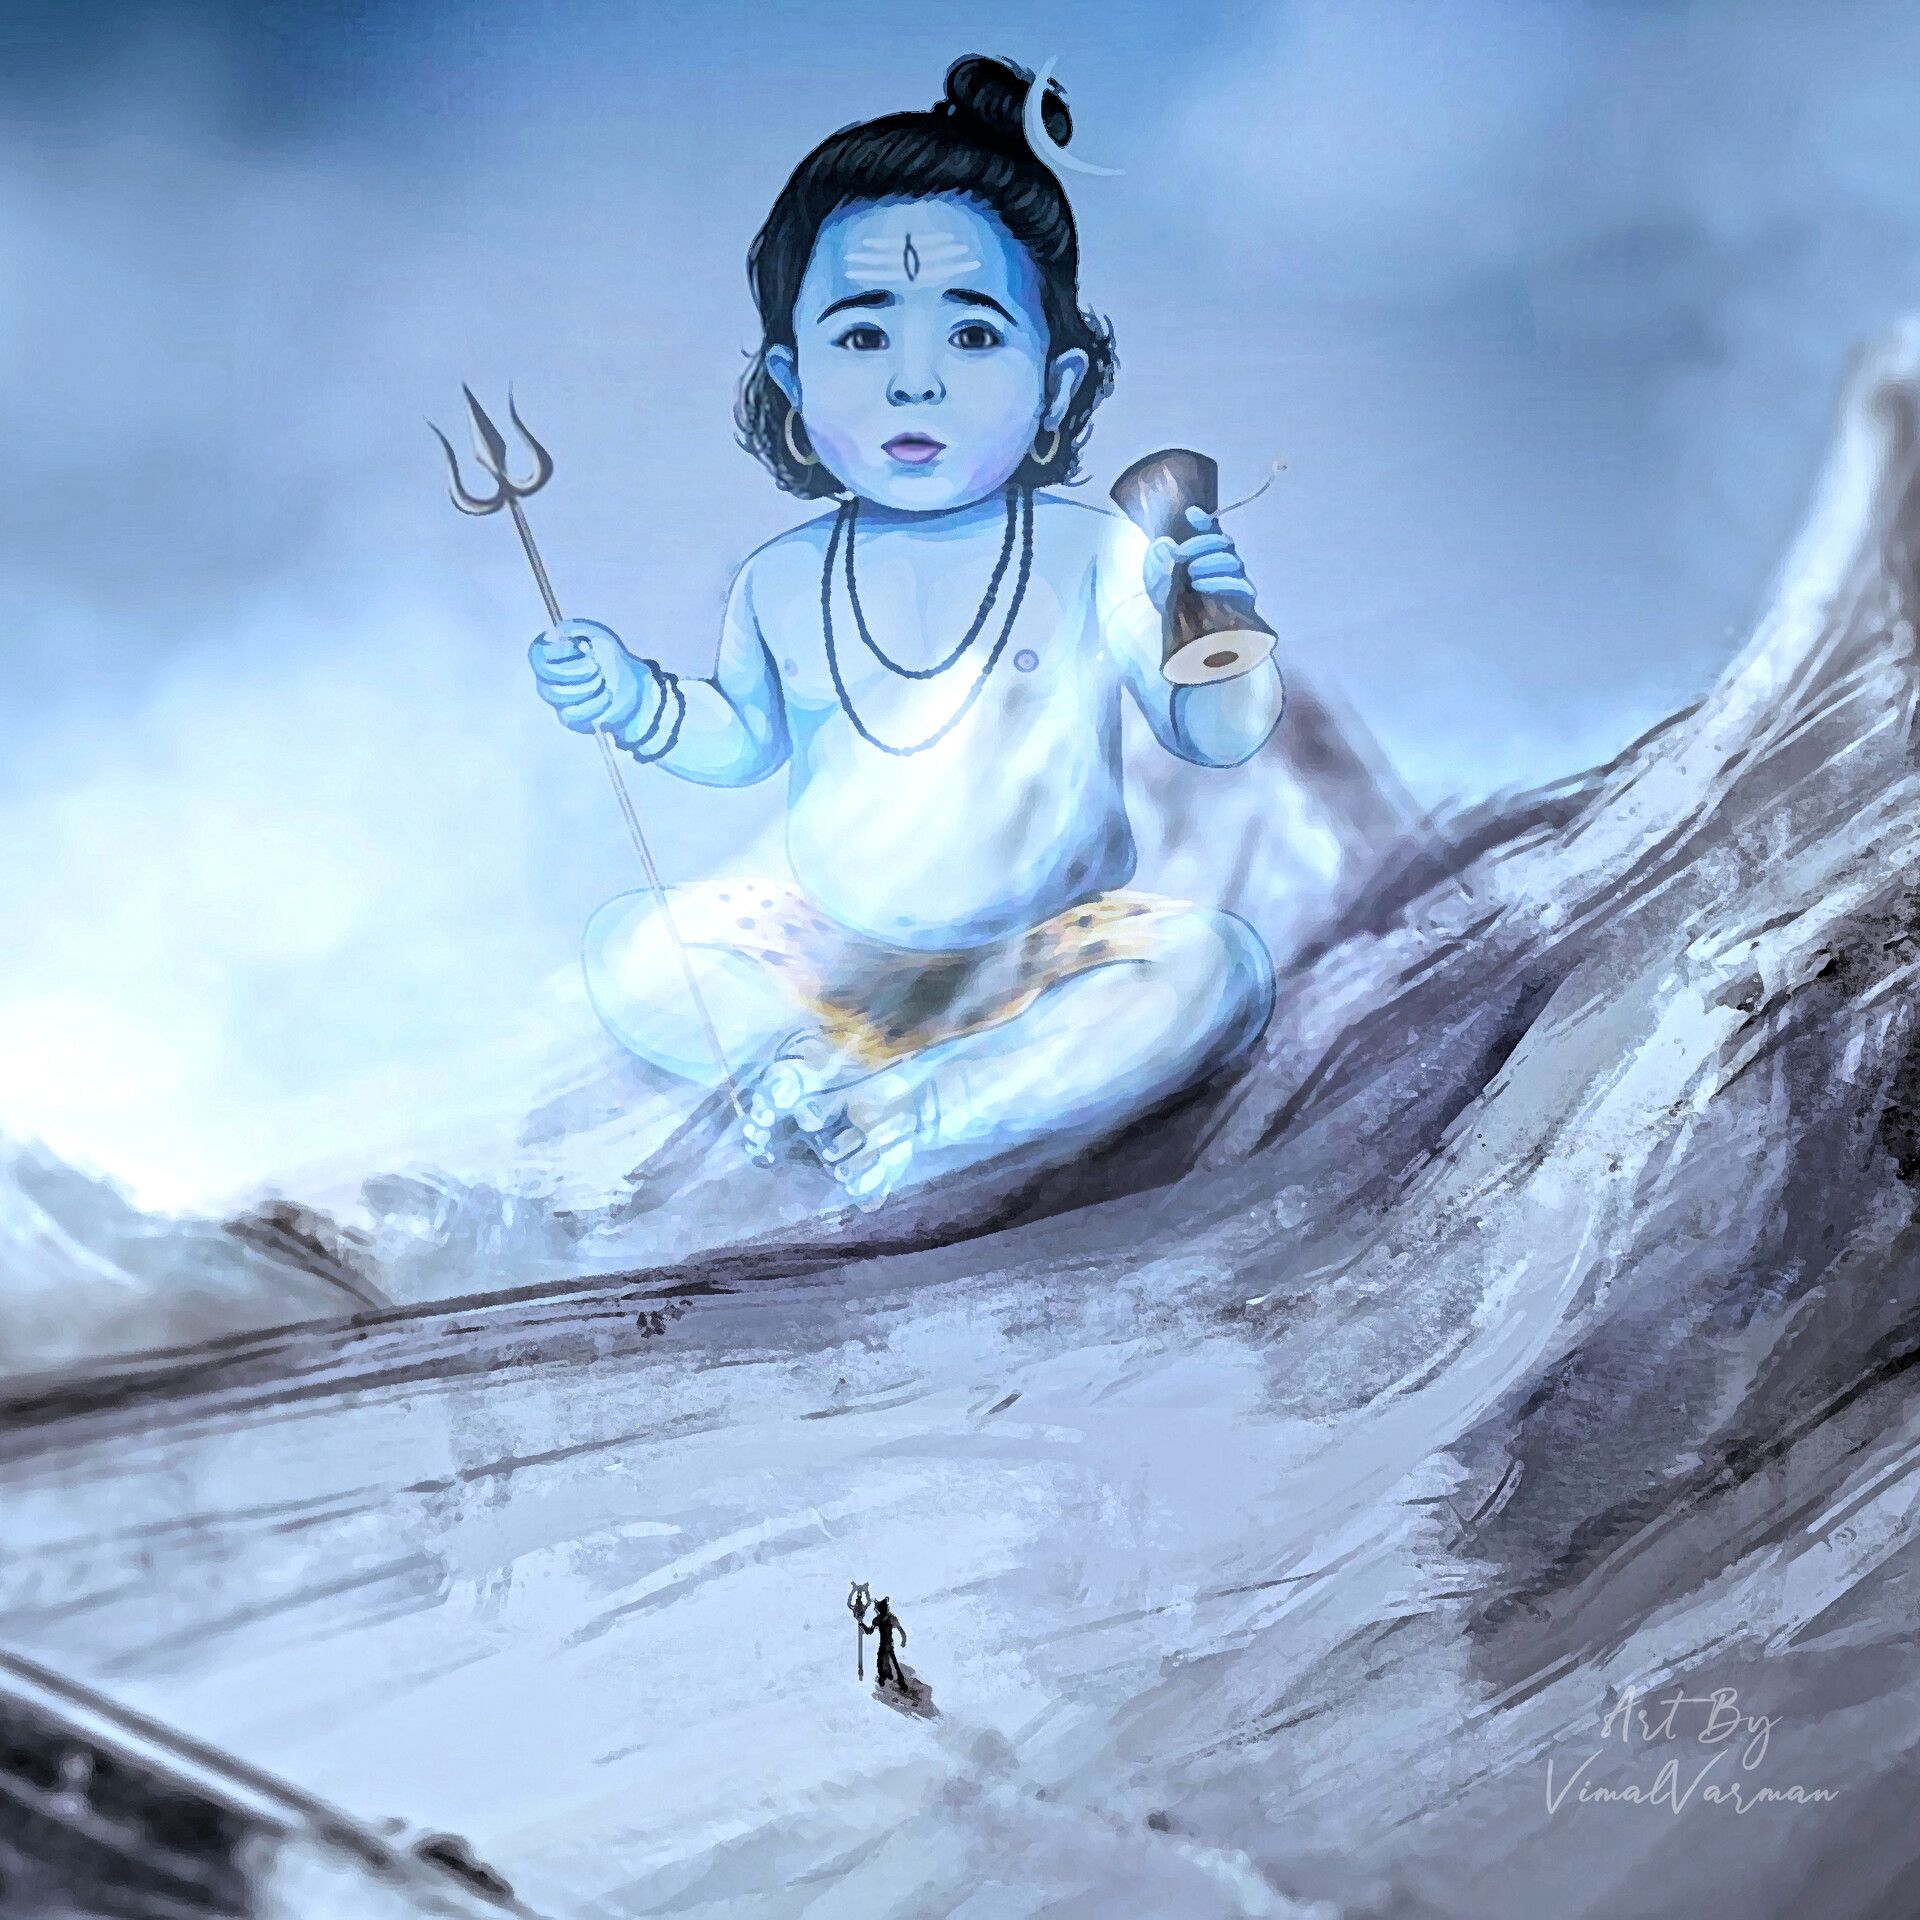 Baby Lord Shiva Wallpapers - Wallpaper Cave